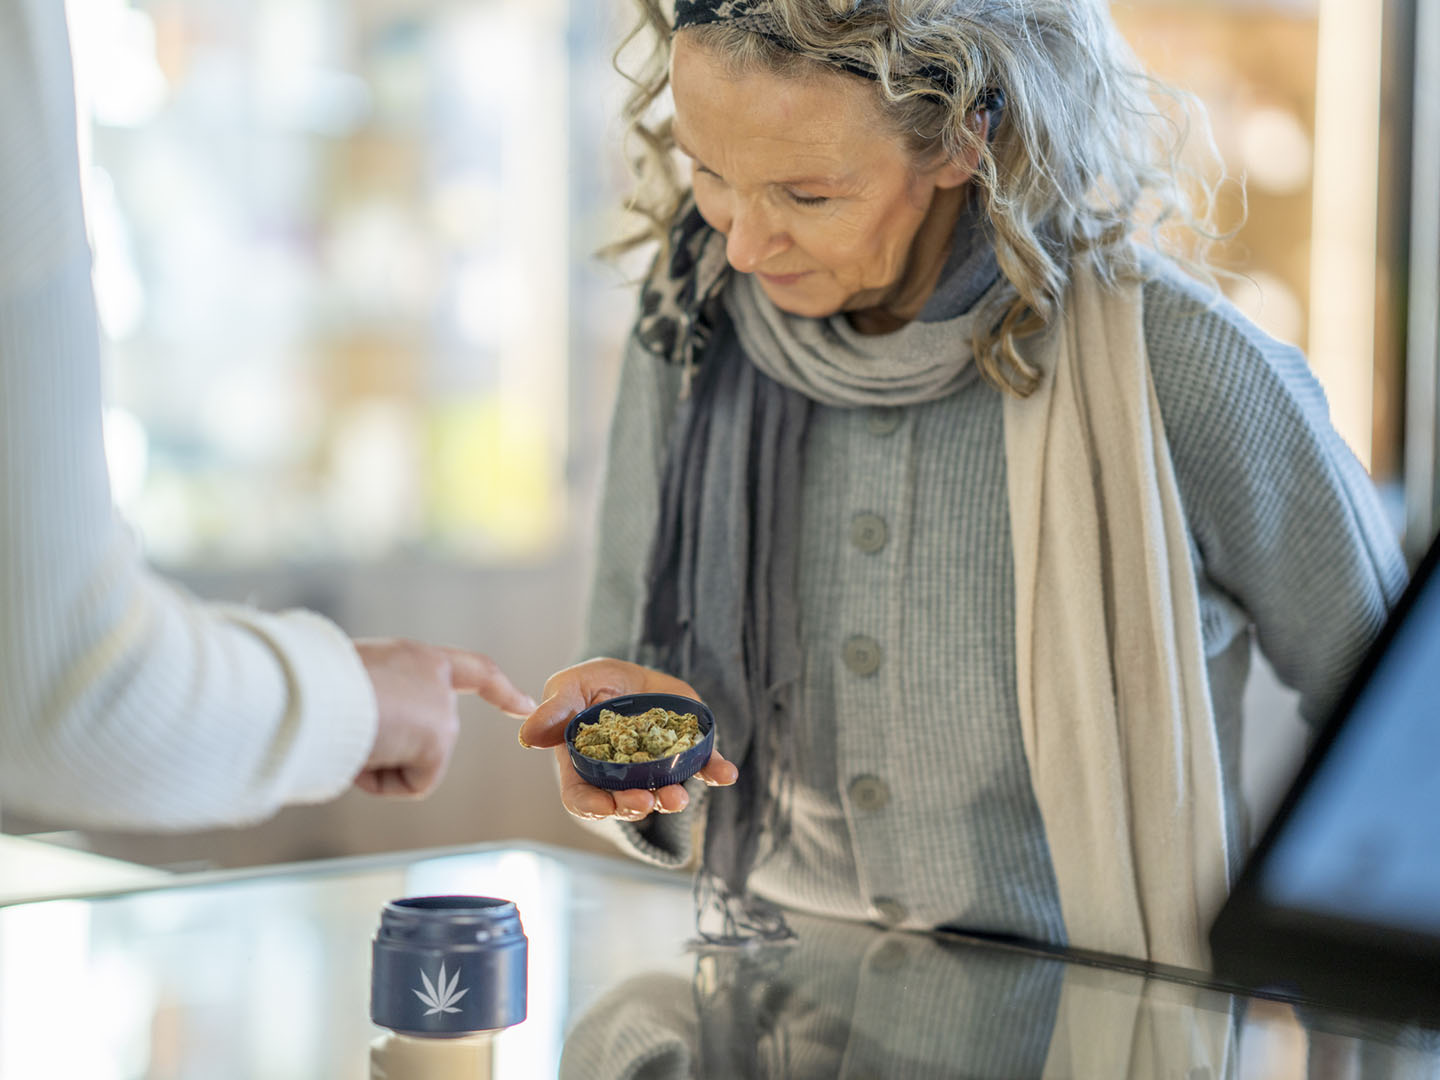 A mature woman stands at the counter of a legal cannabis retailer as she holds out a lid of buds.  She is dressed casually and looking down to inspect the product as the associate tries to sell it to her.